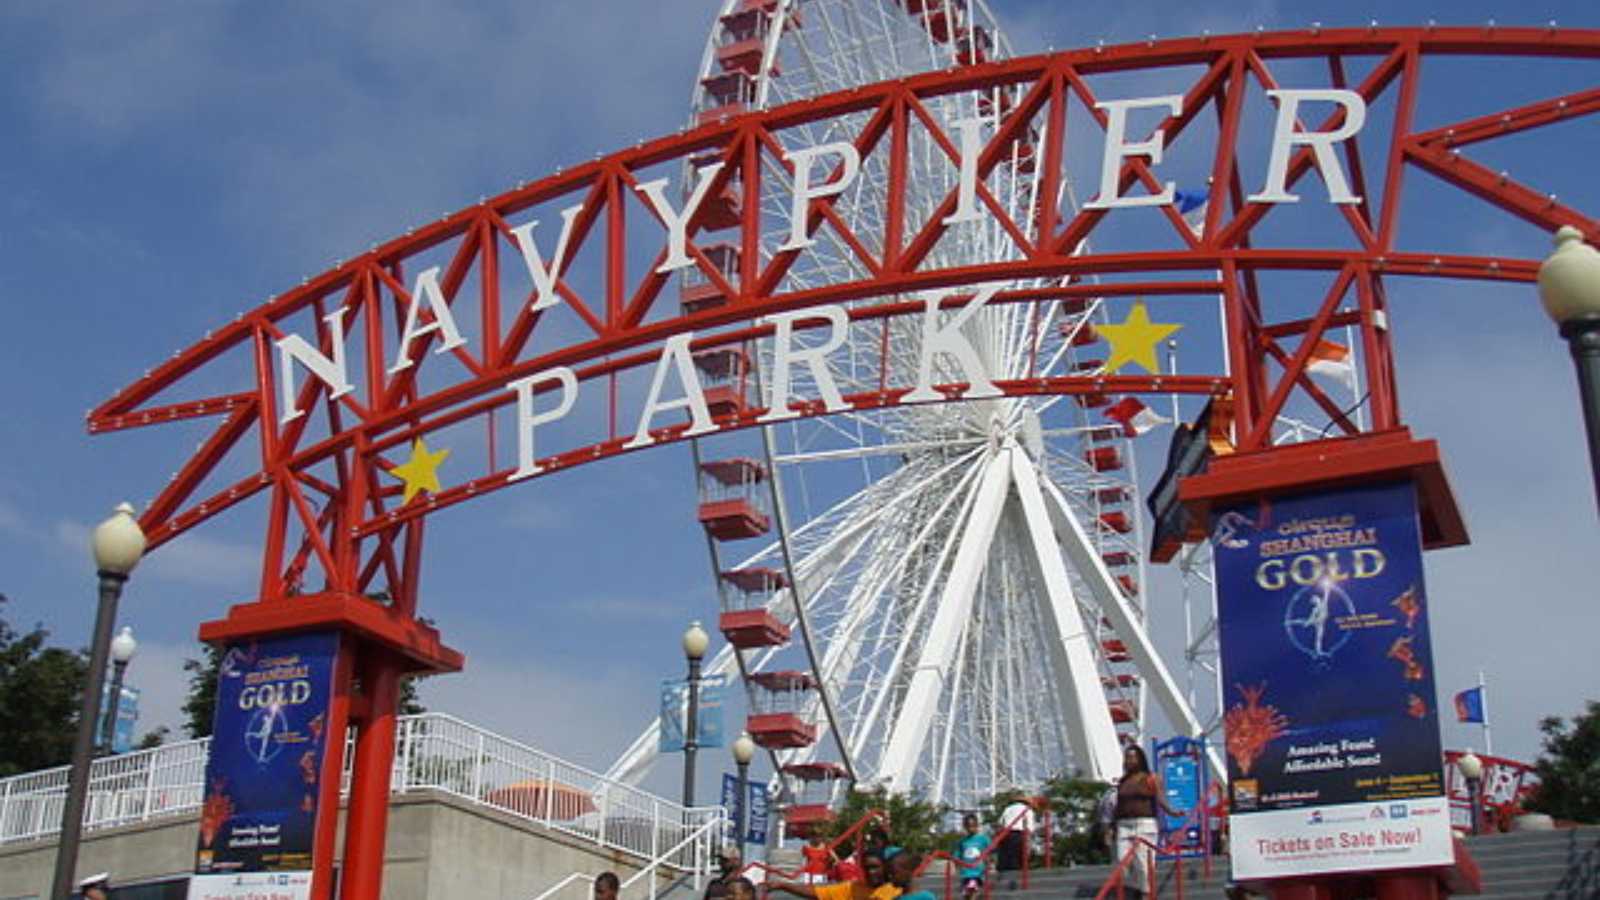 <p><span>Navy Pier offers generic attractions and pricey food stands. This stop might be underwhelming unless you're a huge fan of Ferris wheels and chain restaurants.</span></p>